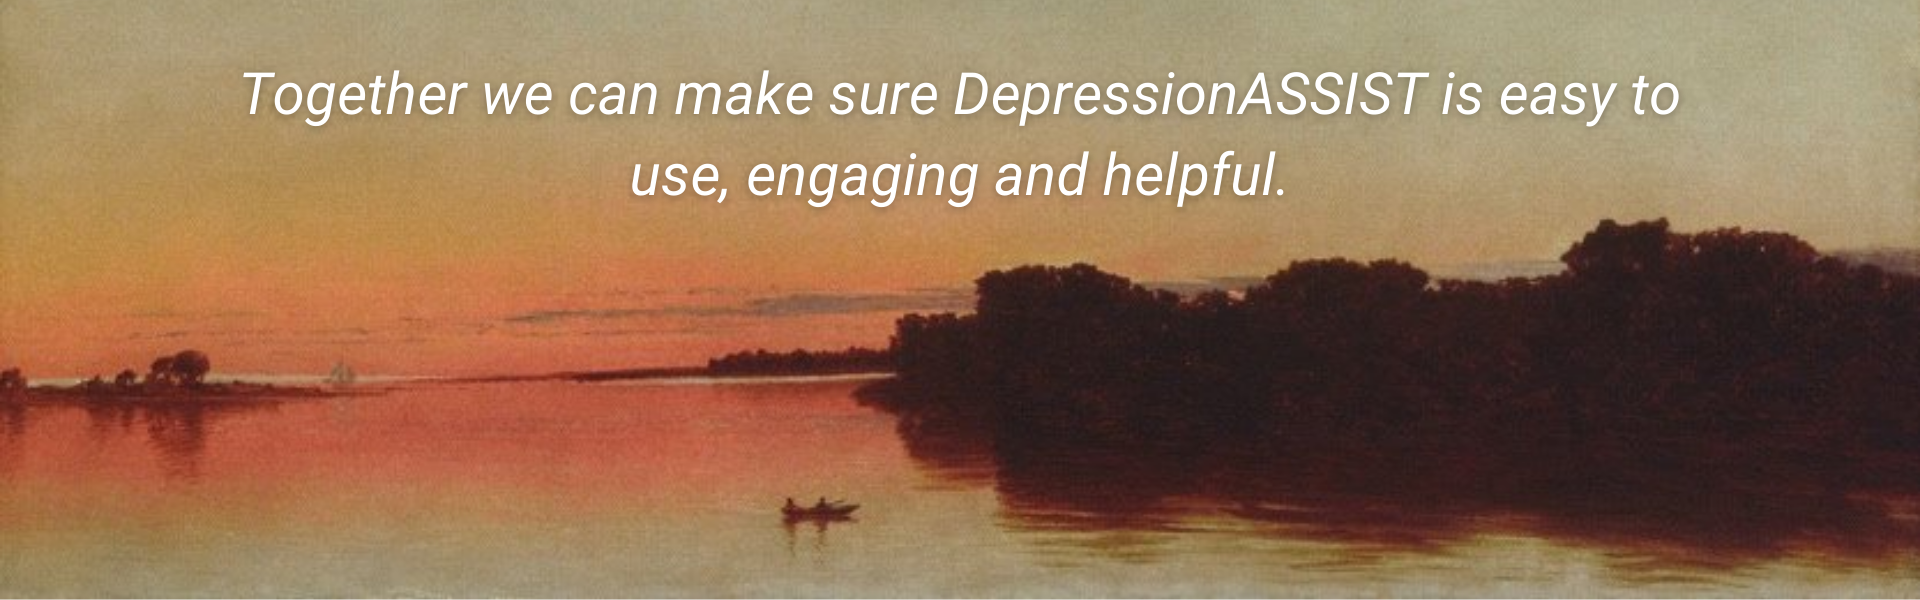 Together we can make sure DepressionASSIST is easy to use, engaging and helpful.